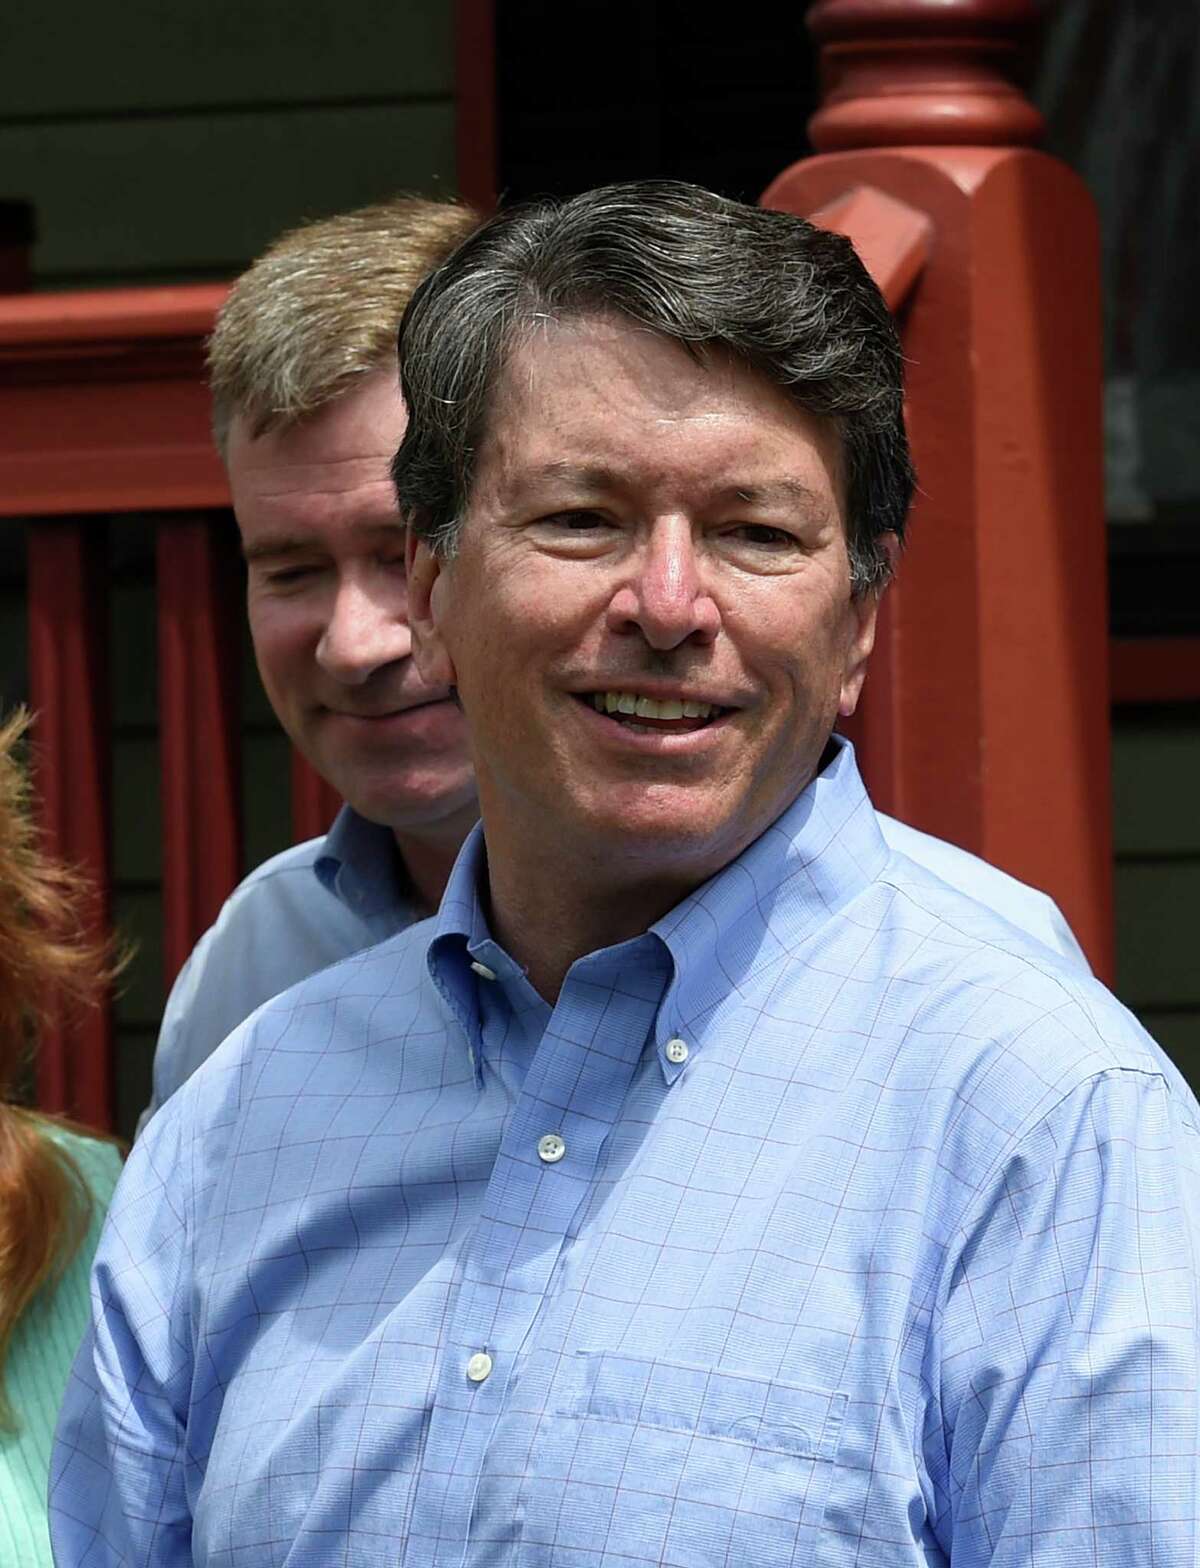 John Faso accepts the endorsement of U.S. Rep. Chris Gibson for his seat in Congress on Monday, July 18, 2016, outside Gibson's home in Kinderhook, N.Y. (Skip Dickstein/Times Union)